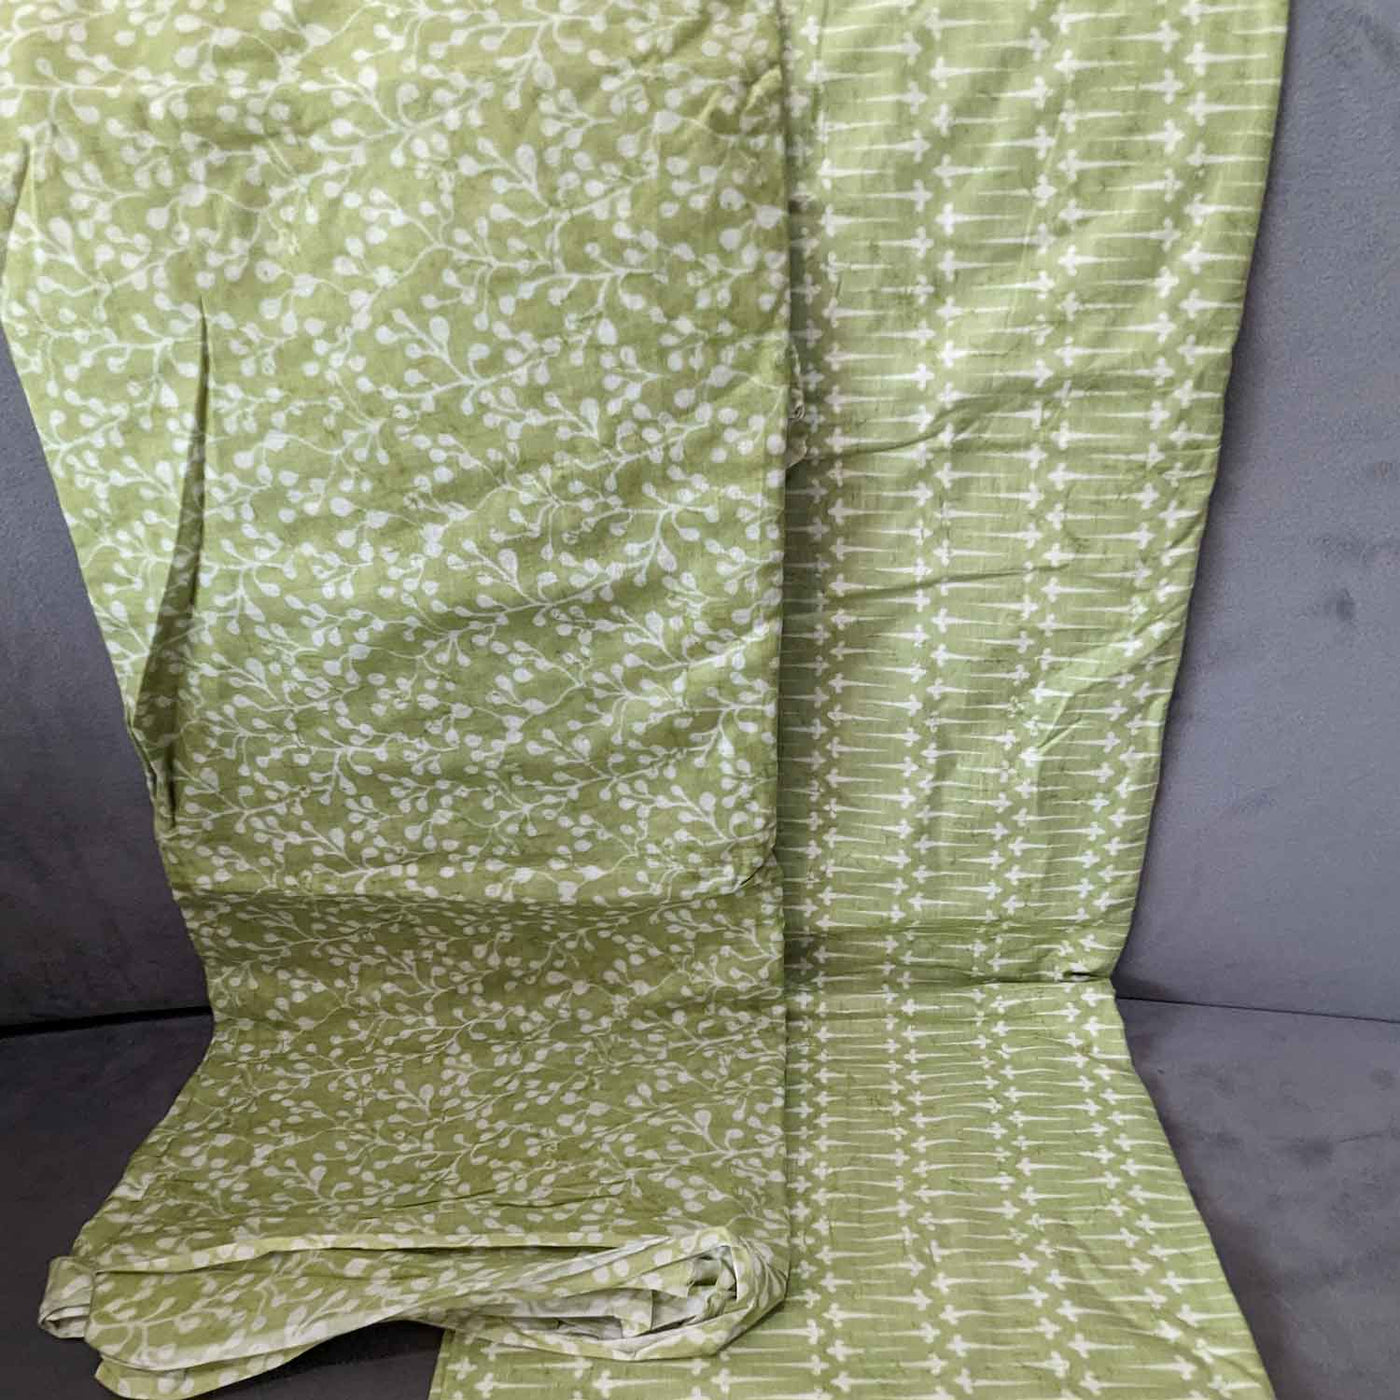 Green & White Floral / Motifs Cotton Fabric Combo